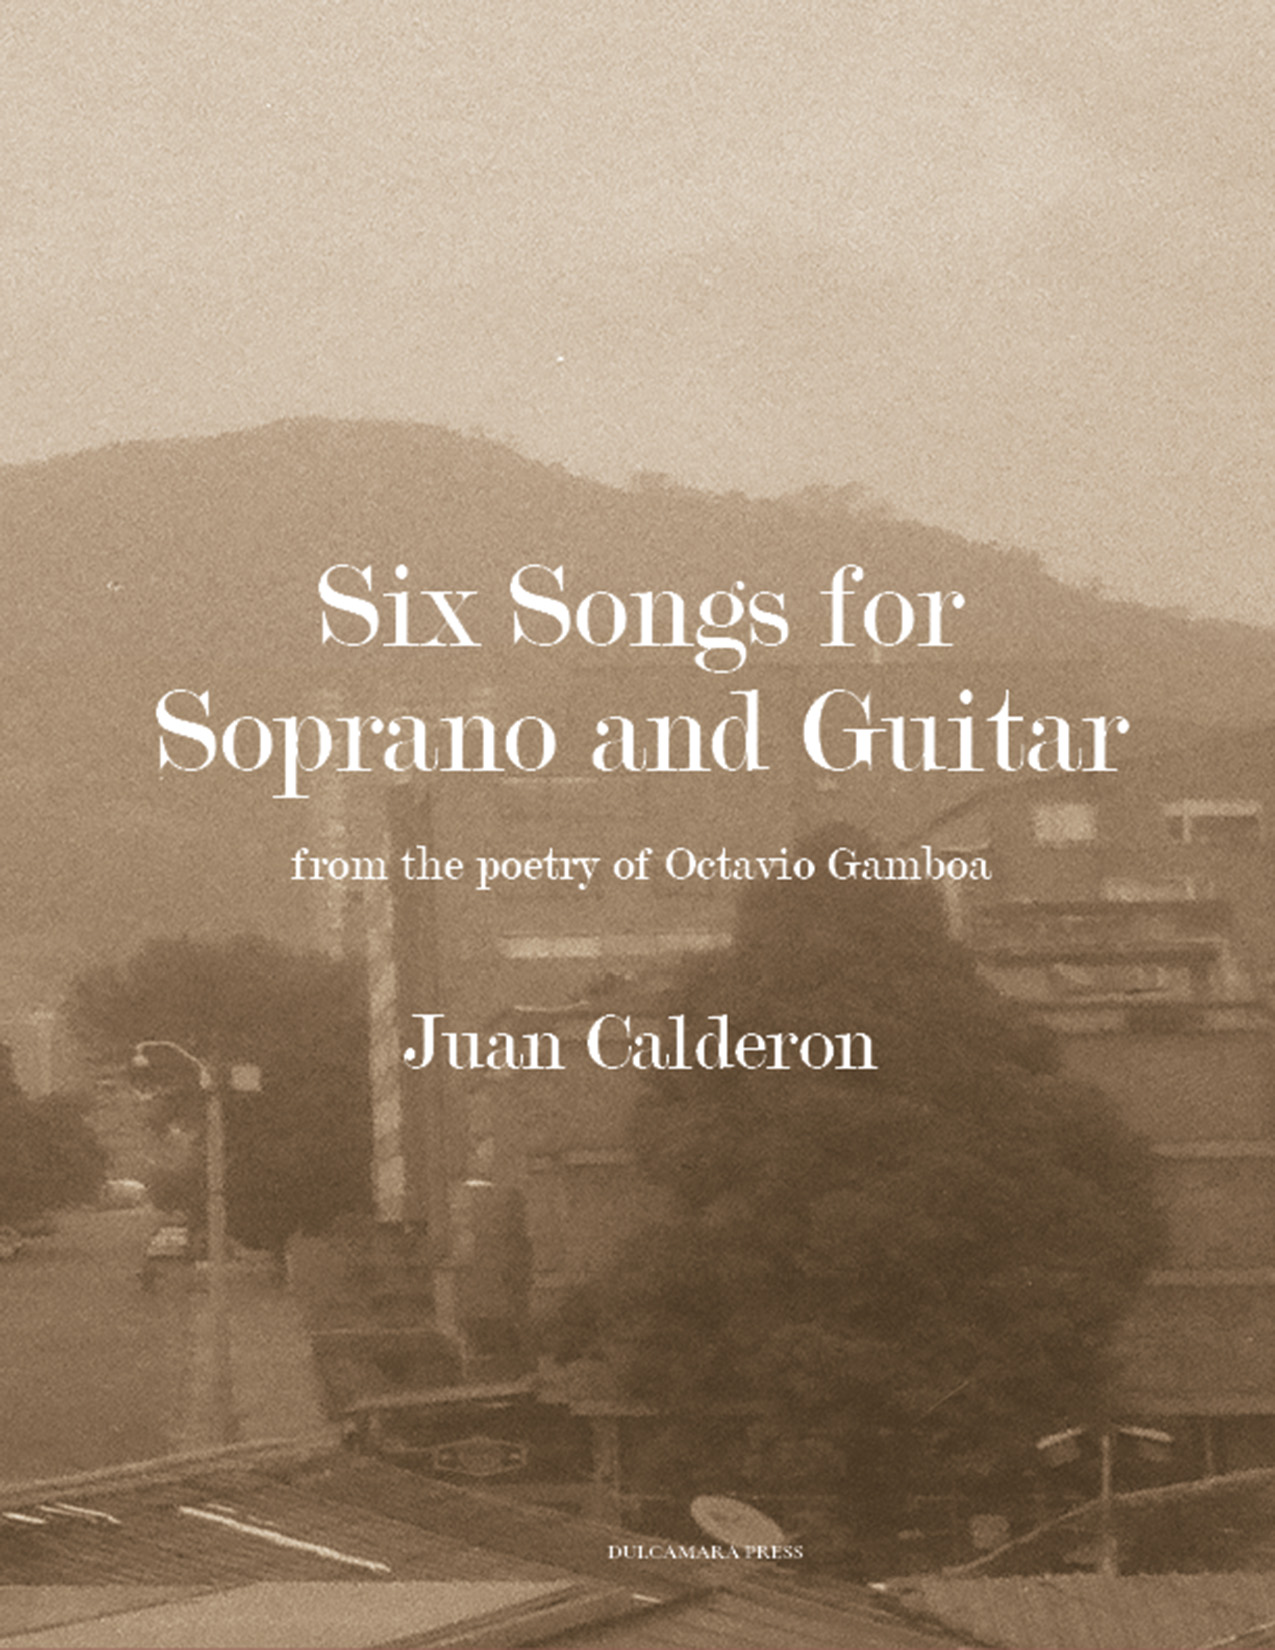 Six Songs for Soprano and Guitar; song cycle by Juan Calderon after poetry by Octavio Gamboa